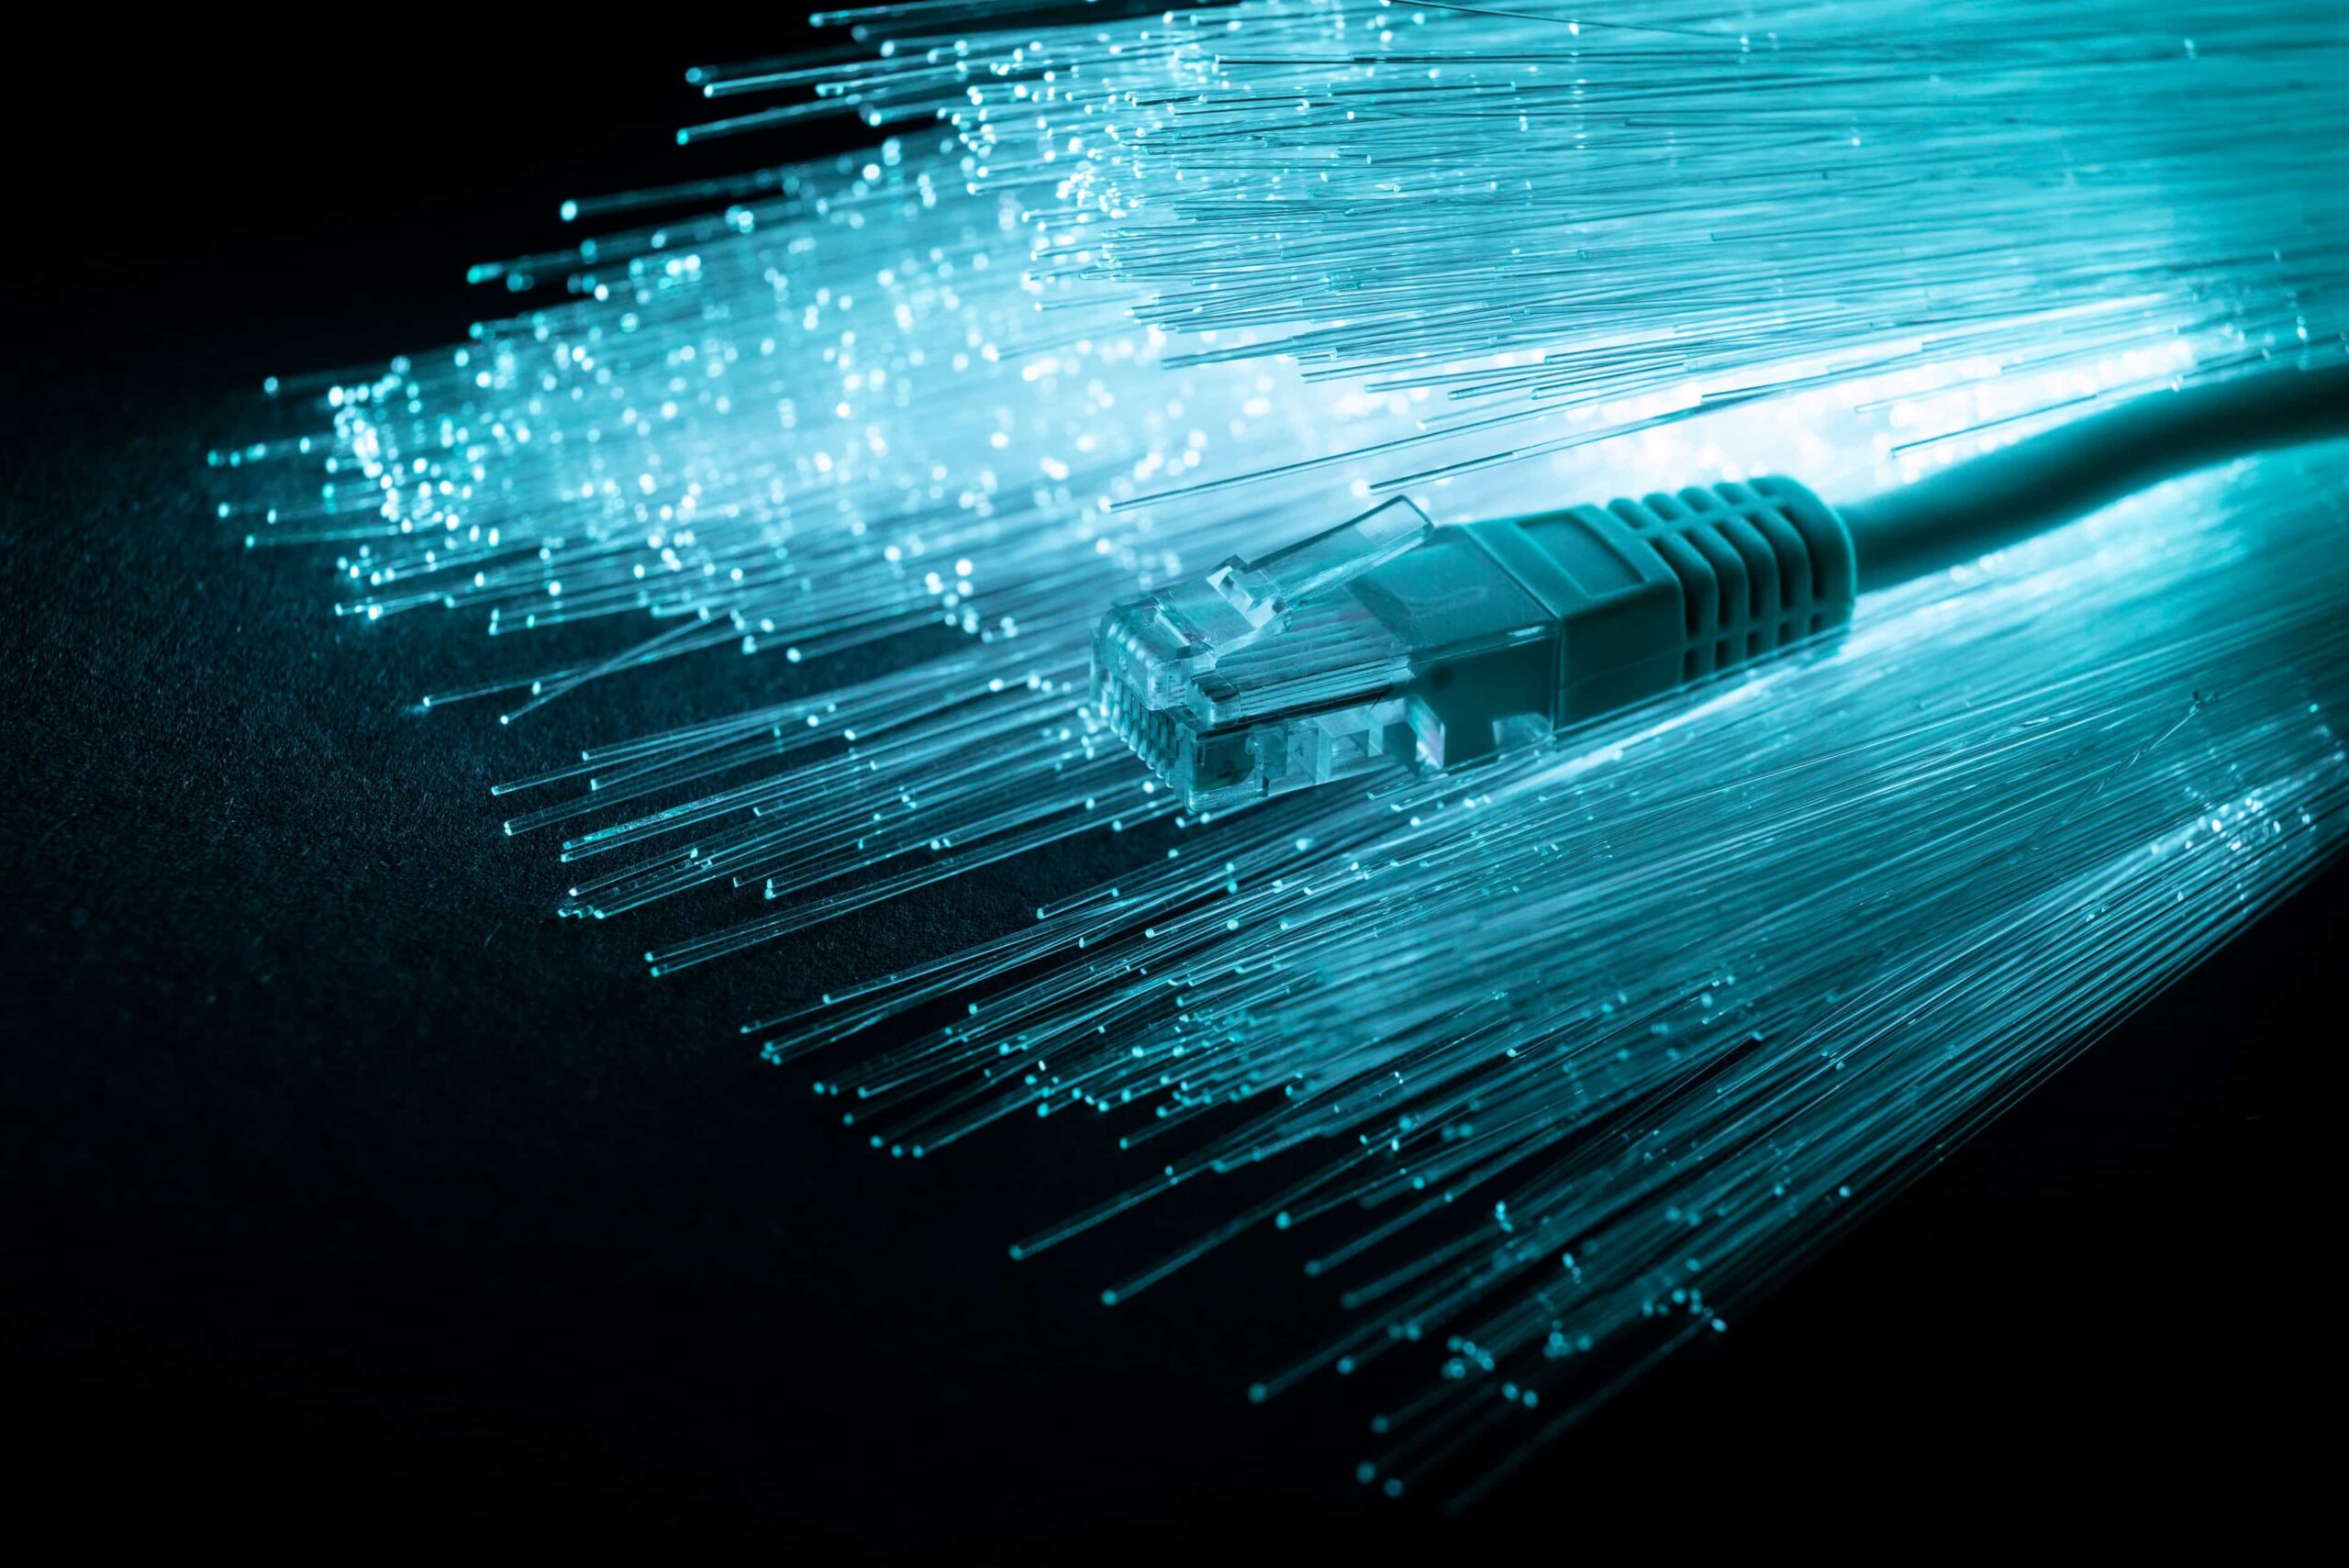 What is Fiber Optic Cable and How Fiber Optic Cables Work?